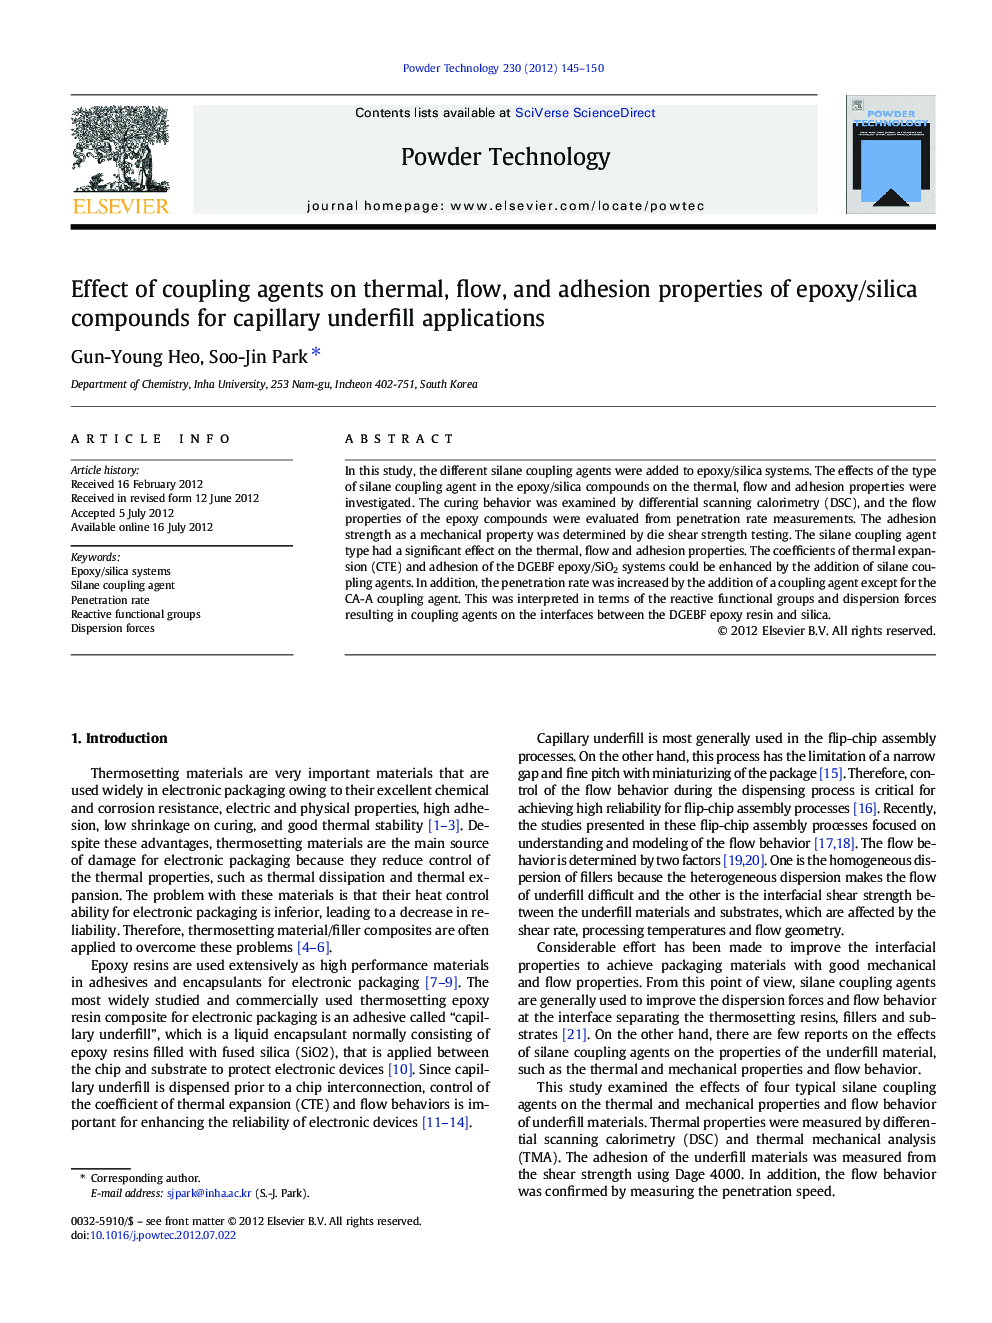 Effect of coupling agents on thermal, flow, and adhesion properties of epoxy/silica compounds for capillary underfill applications